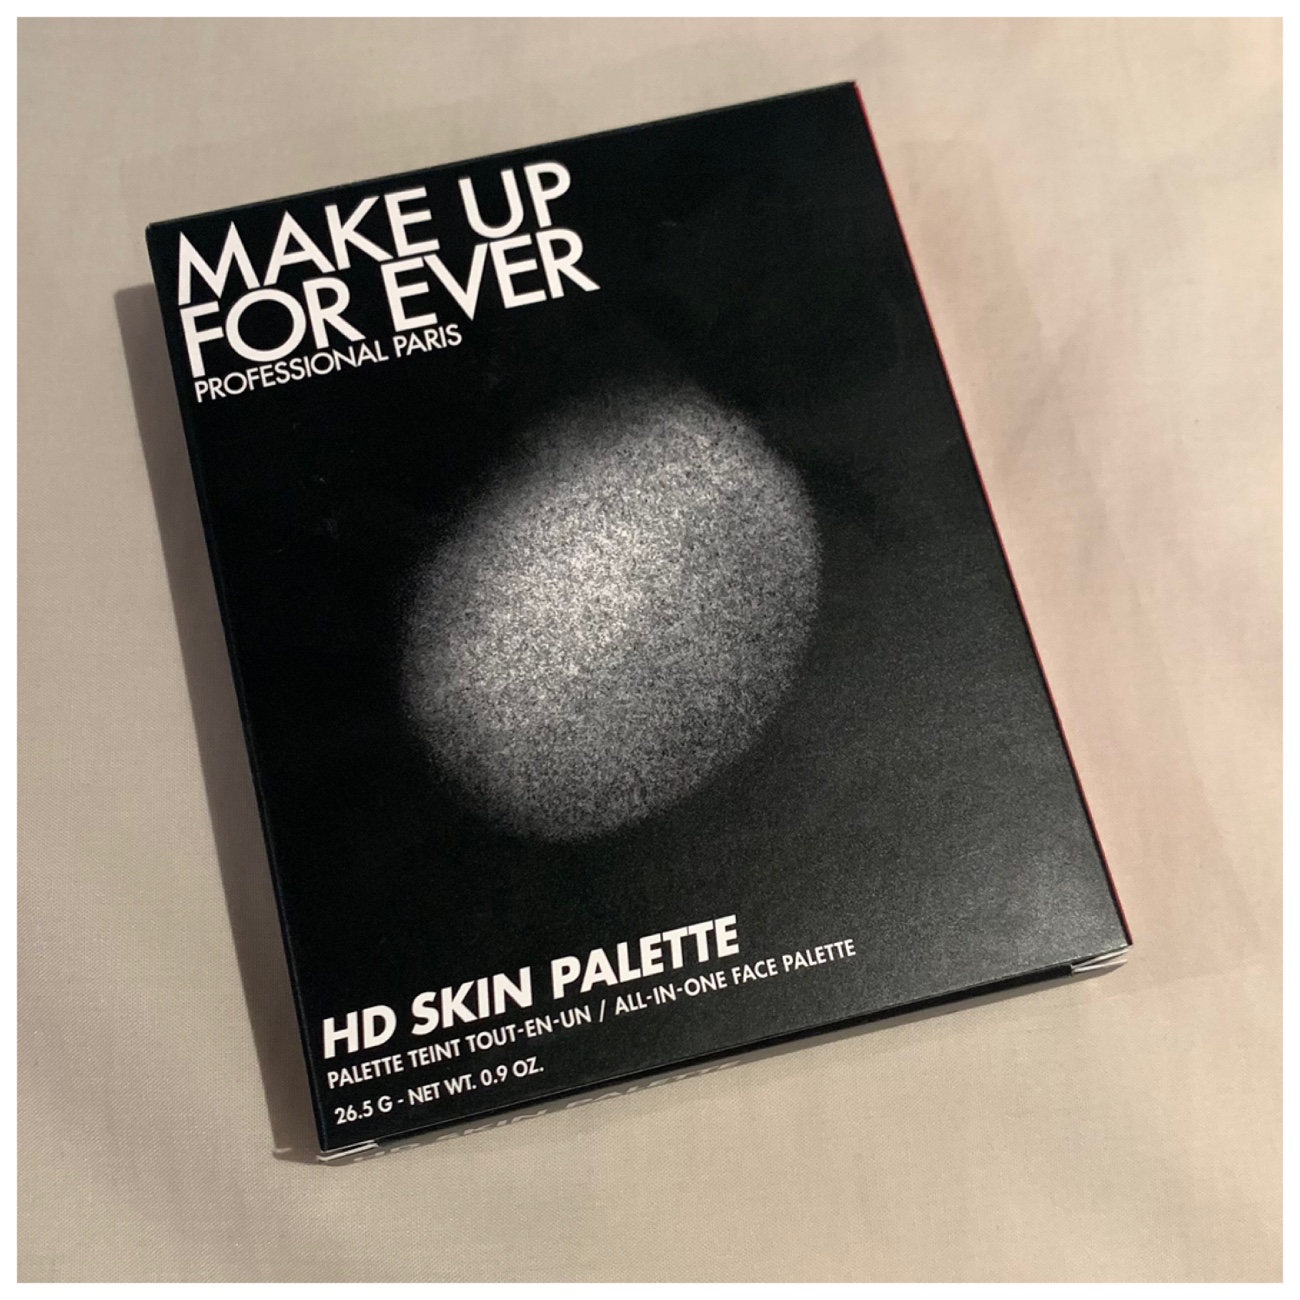 NEW MAKEUP FOREVER ALL IN ONE FACE PALETTE.ODDLY IMPRESSIVE